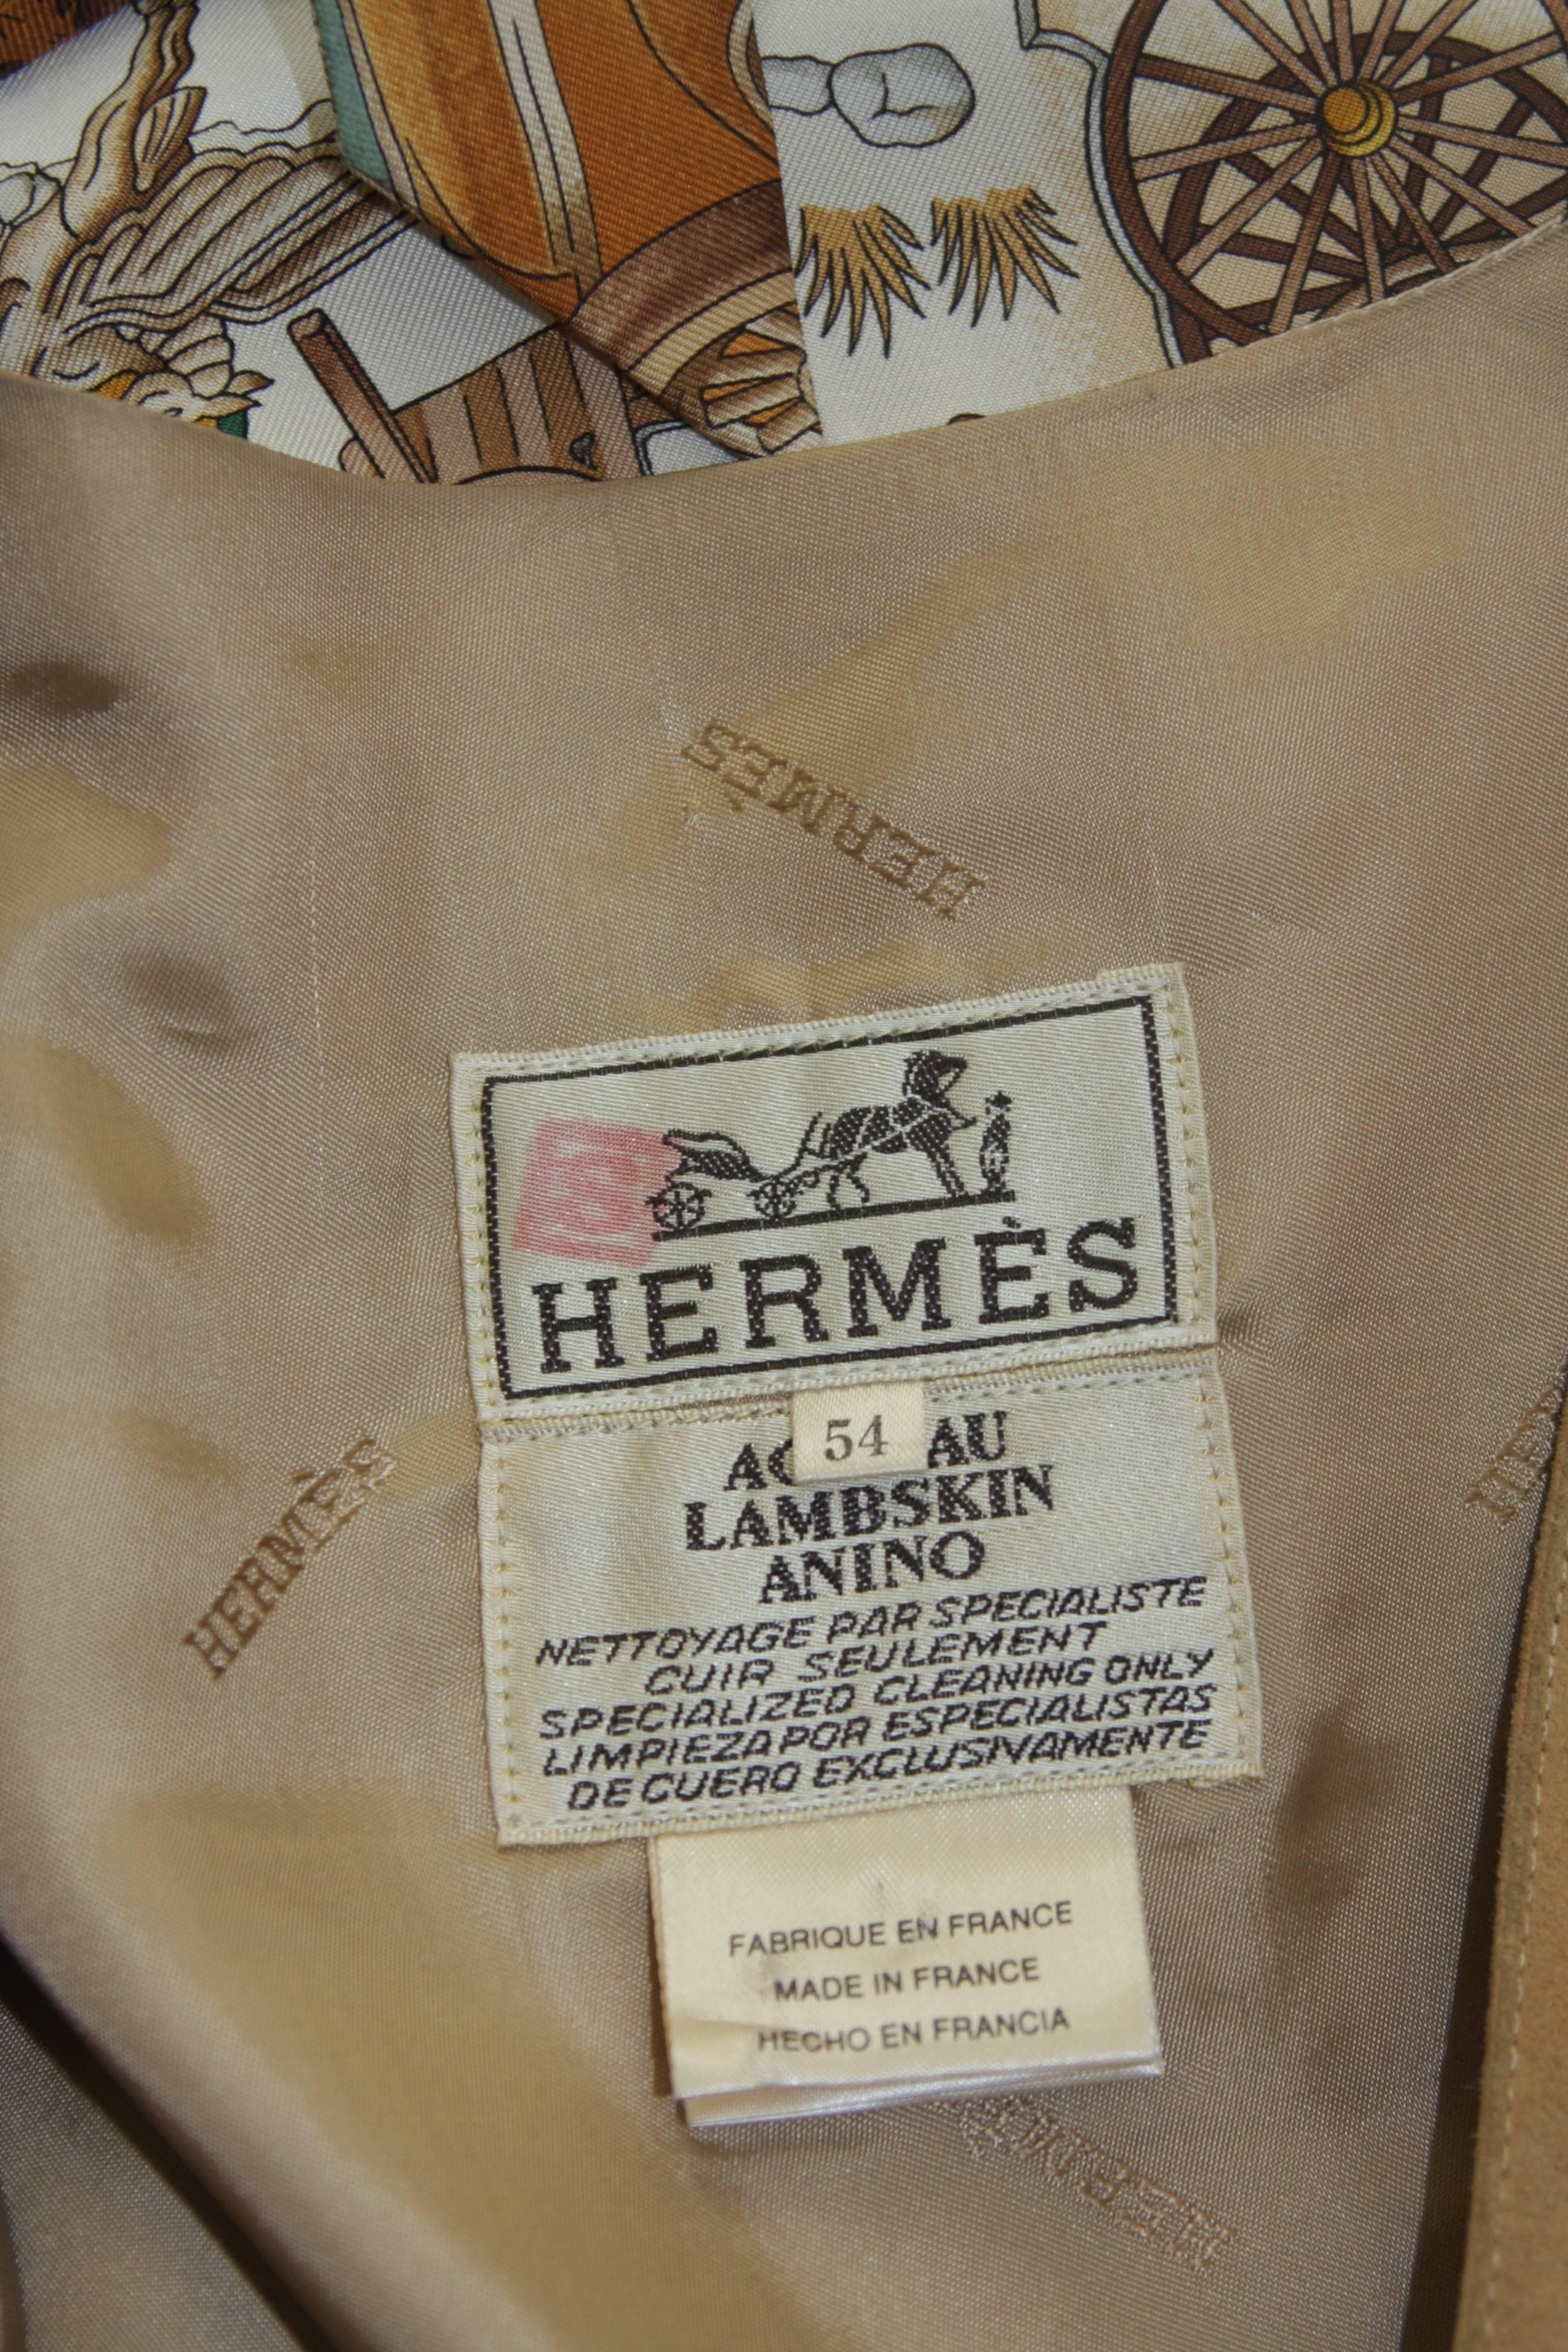 HERMES 'Automobile' Silk Print vest with Suede Front Size 54 3